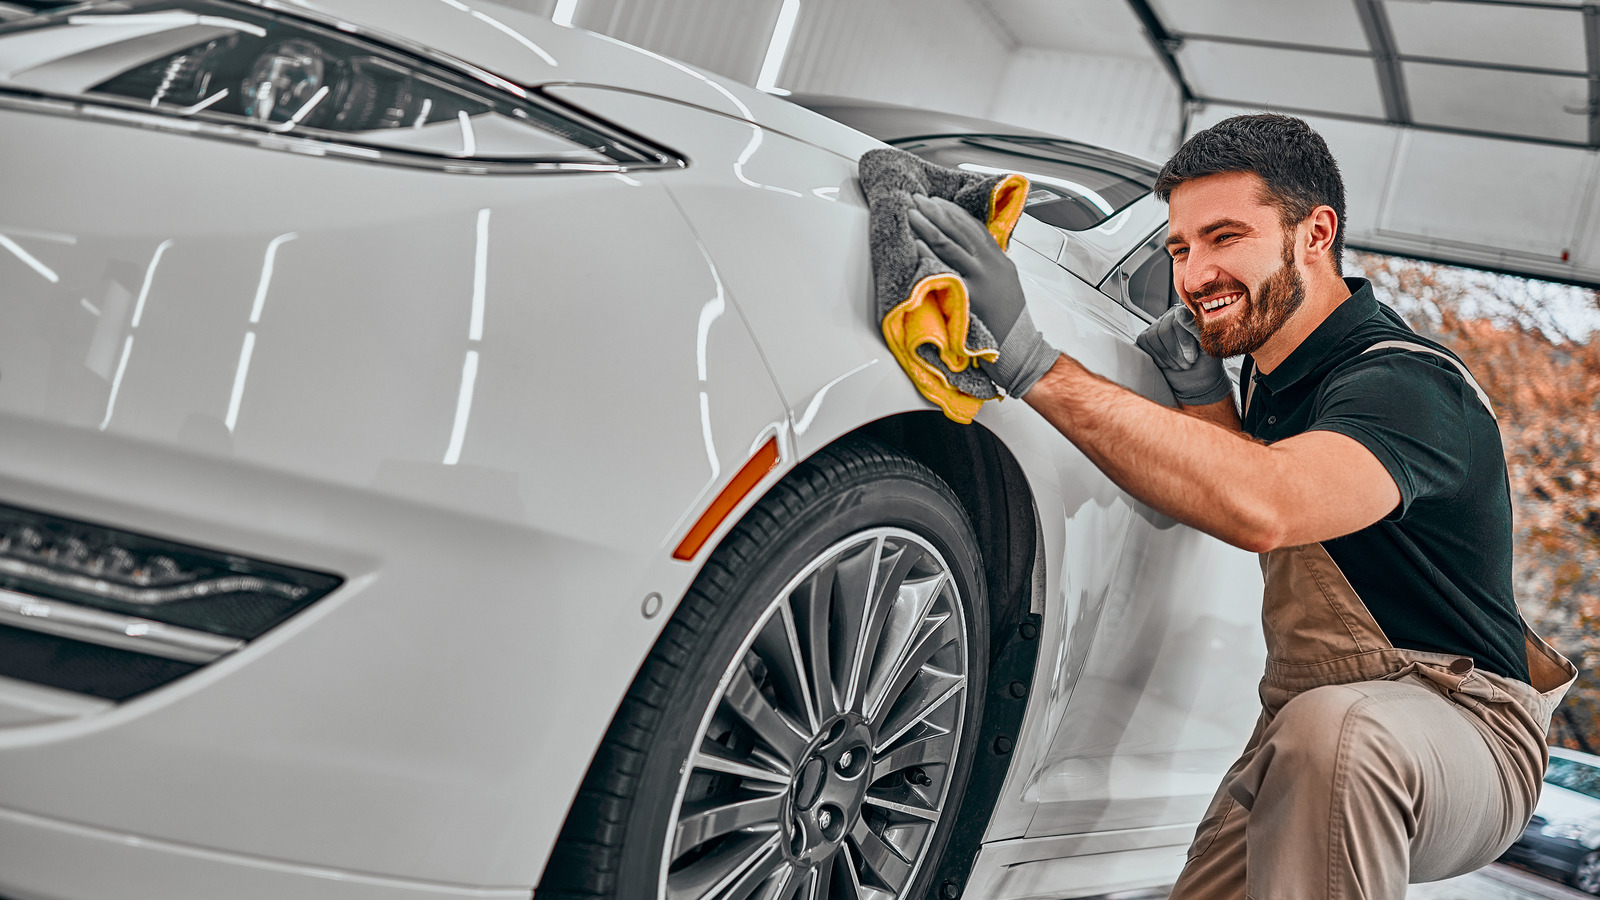 The science behind ceramic car coating – it's a lot more than you